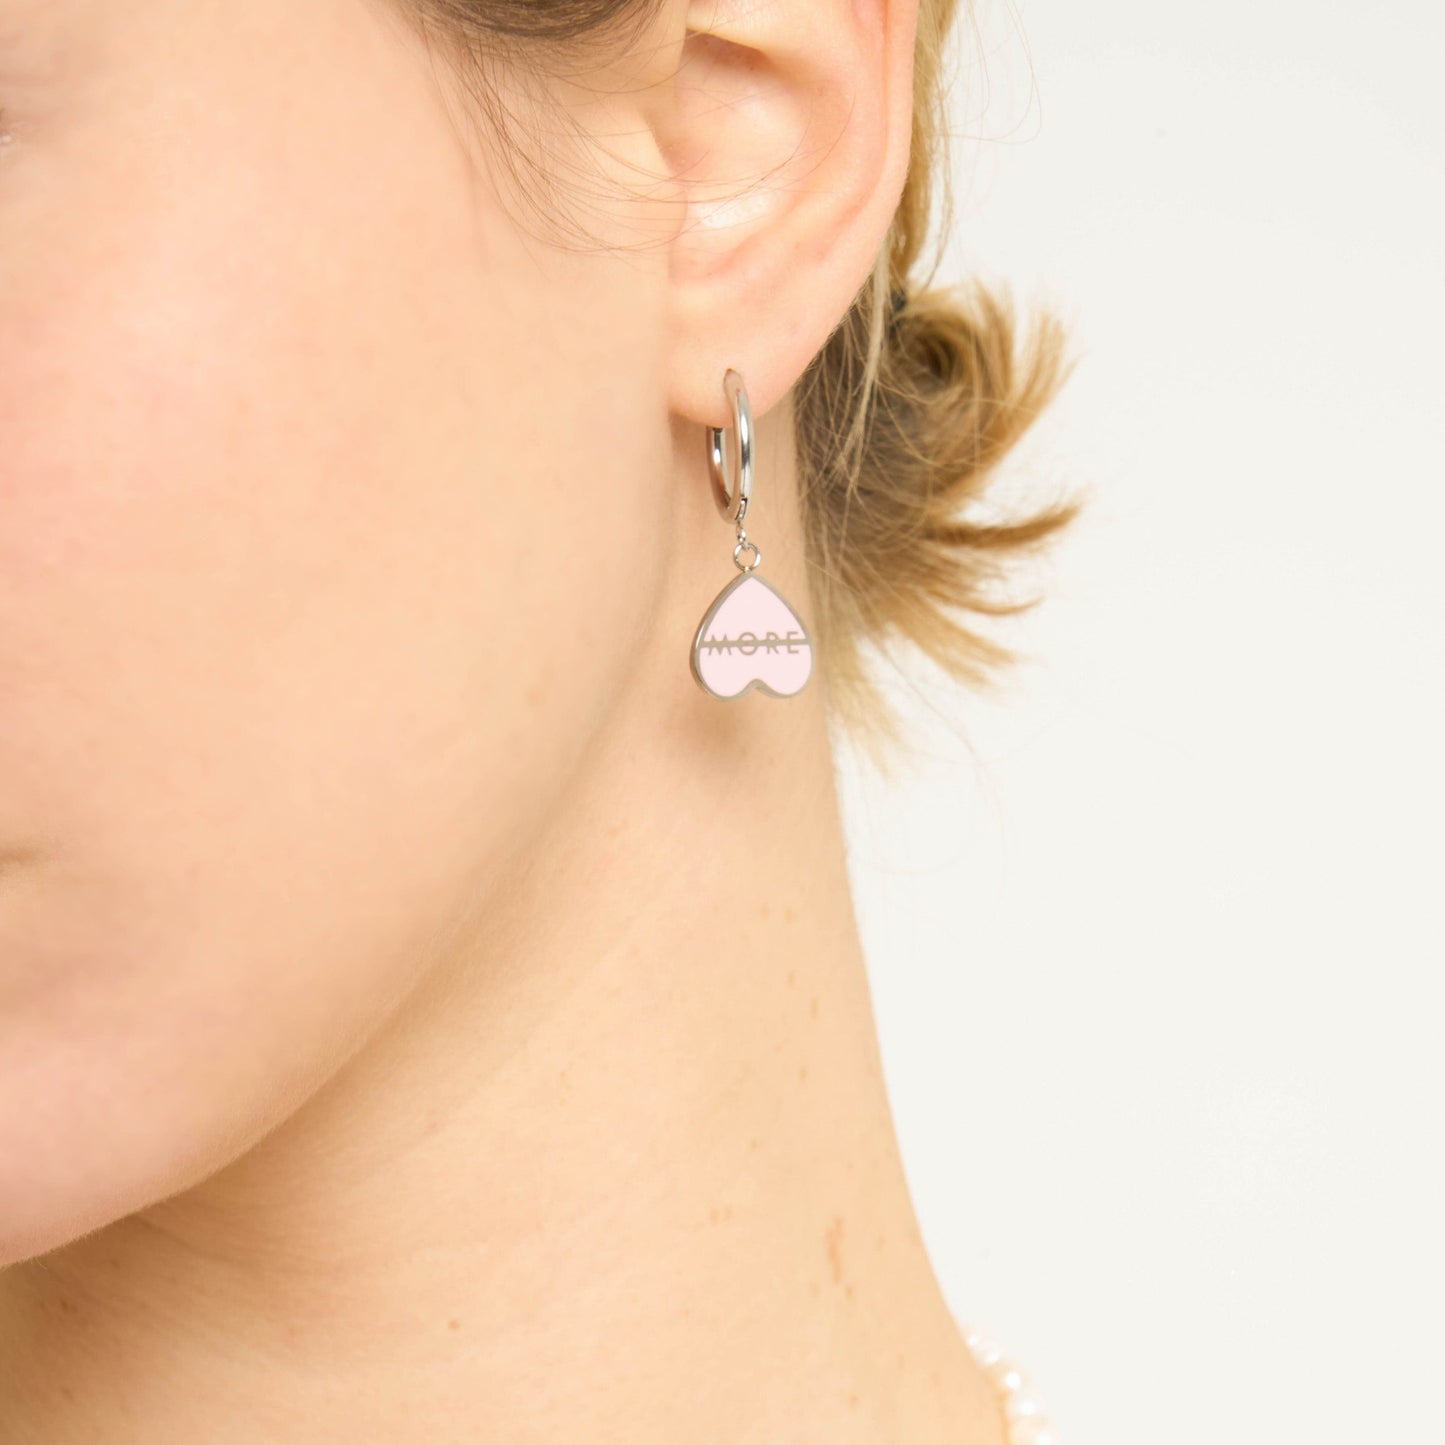 A-MORE The One - Single earring